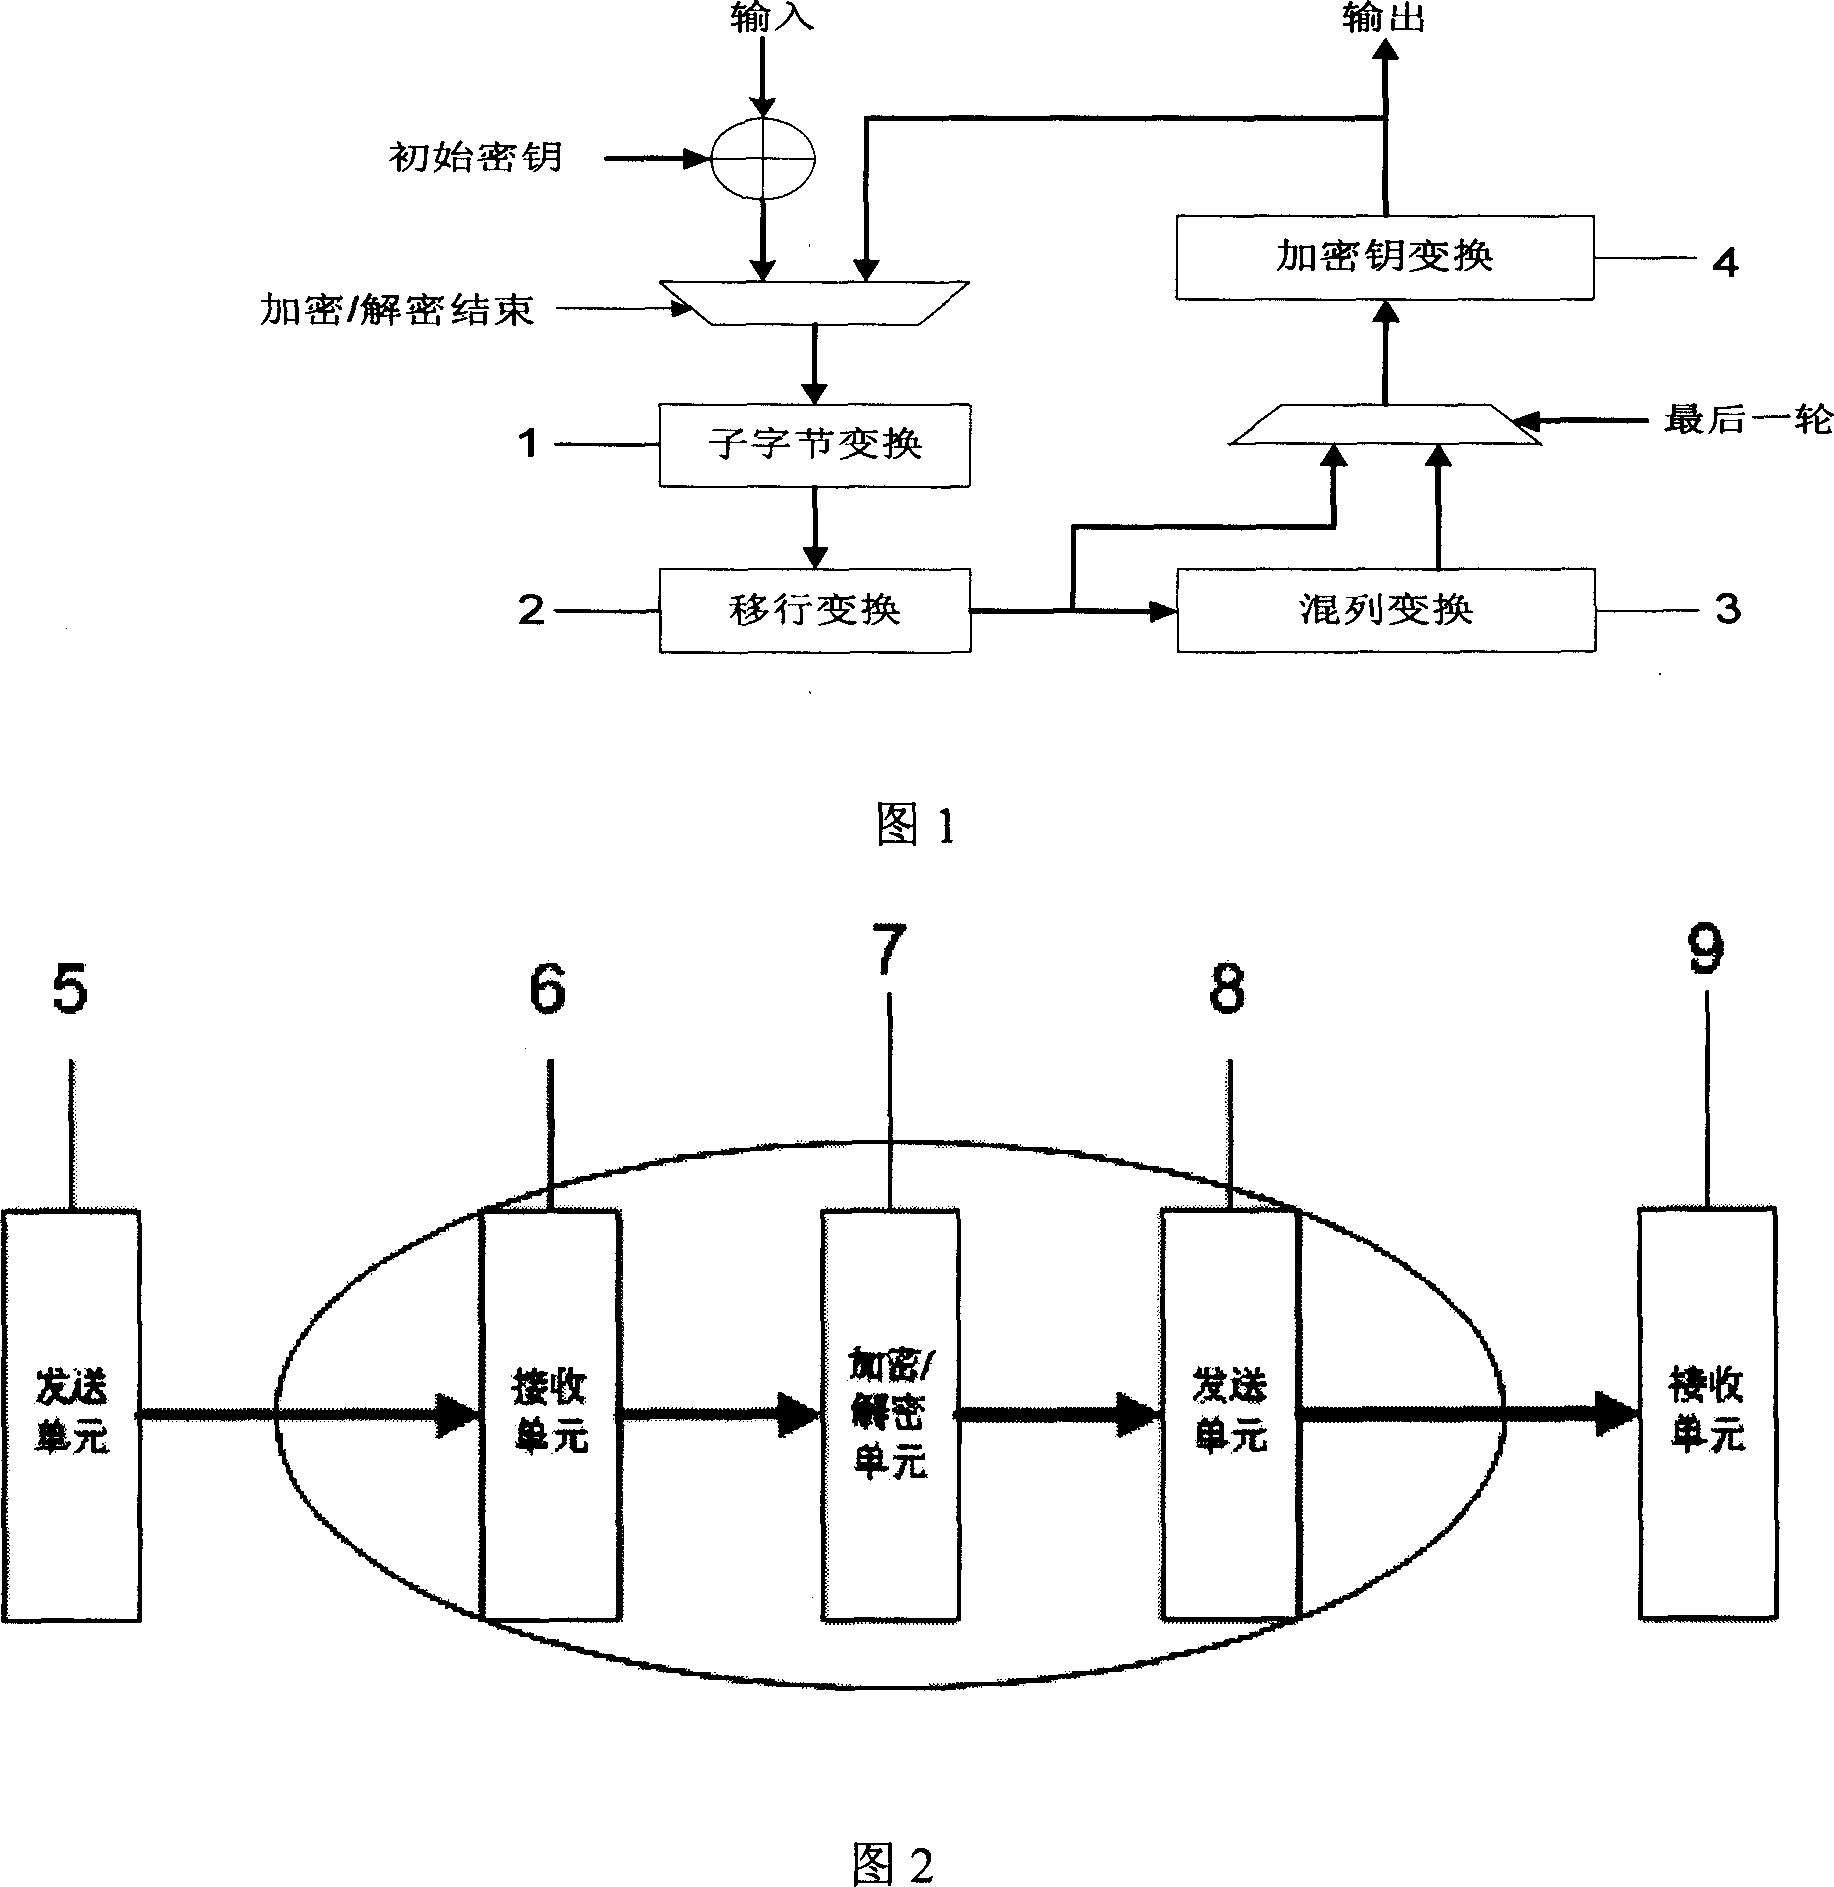 Hard-disc fan-area data enciphering and deciphering method and system